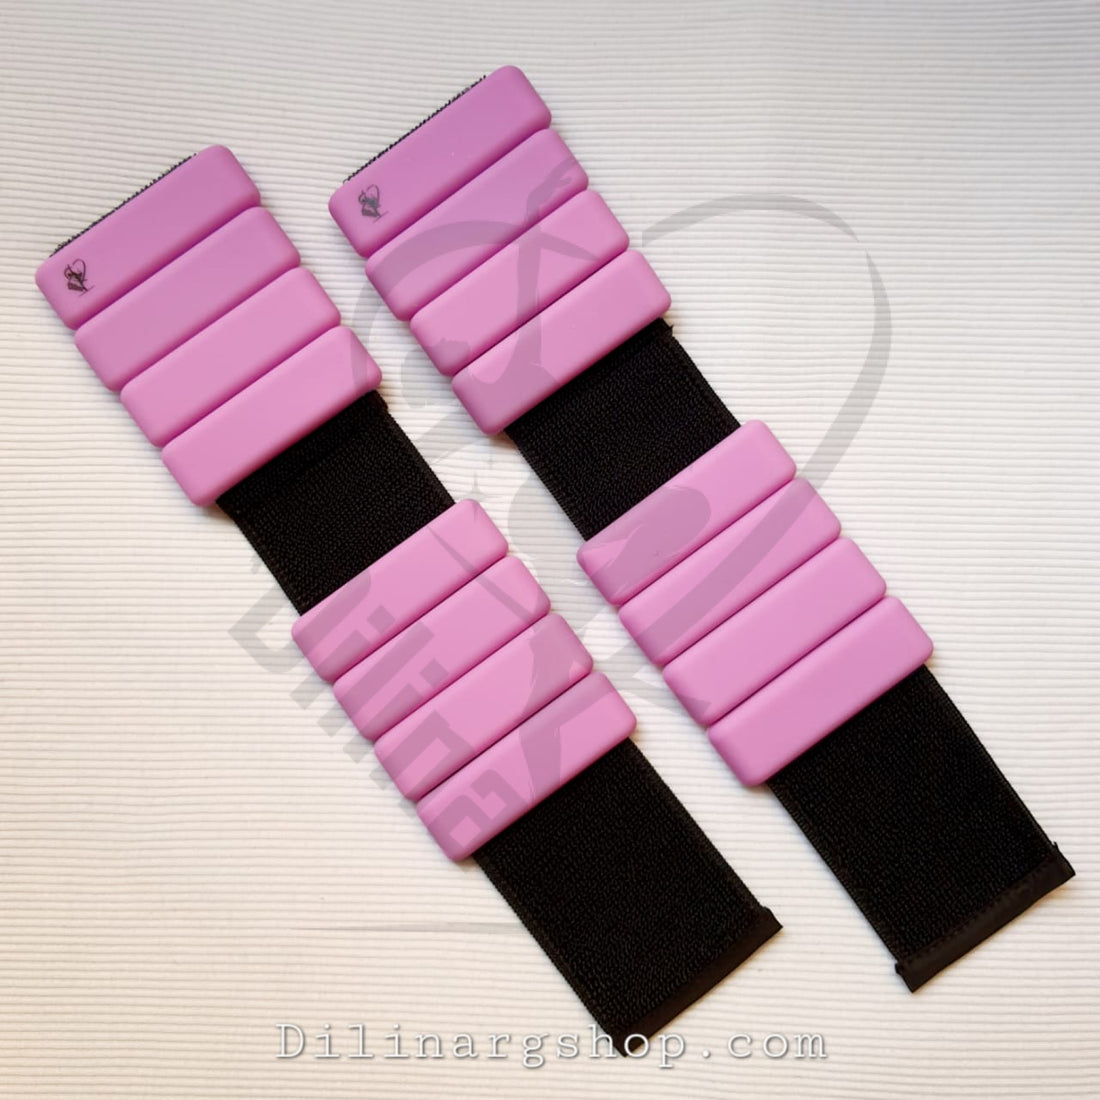 Dilina 0.25Kg Weights Wrist/ Ankle Weights